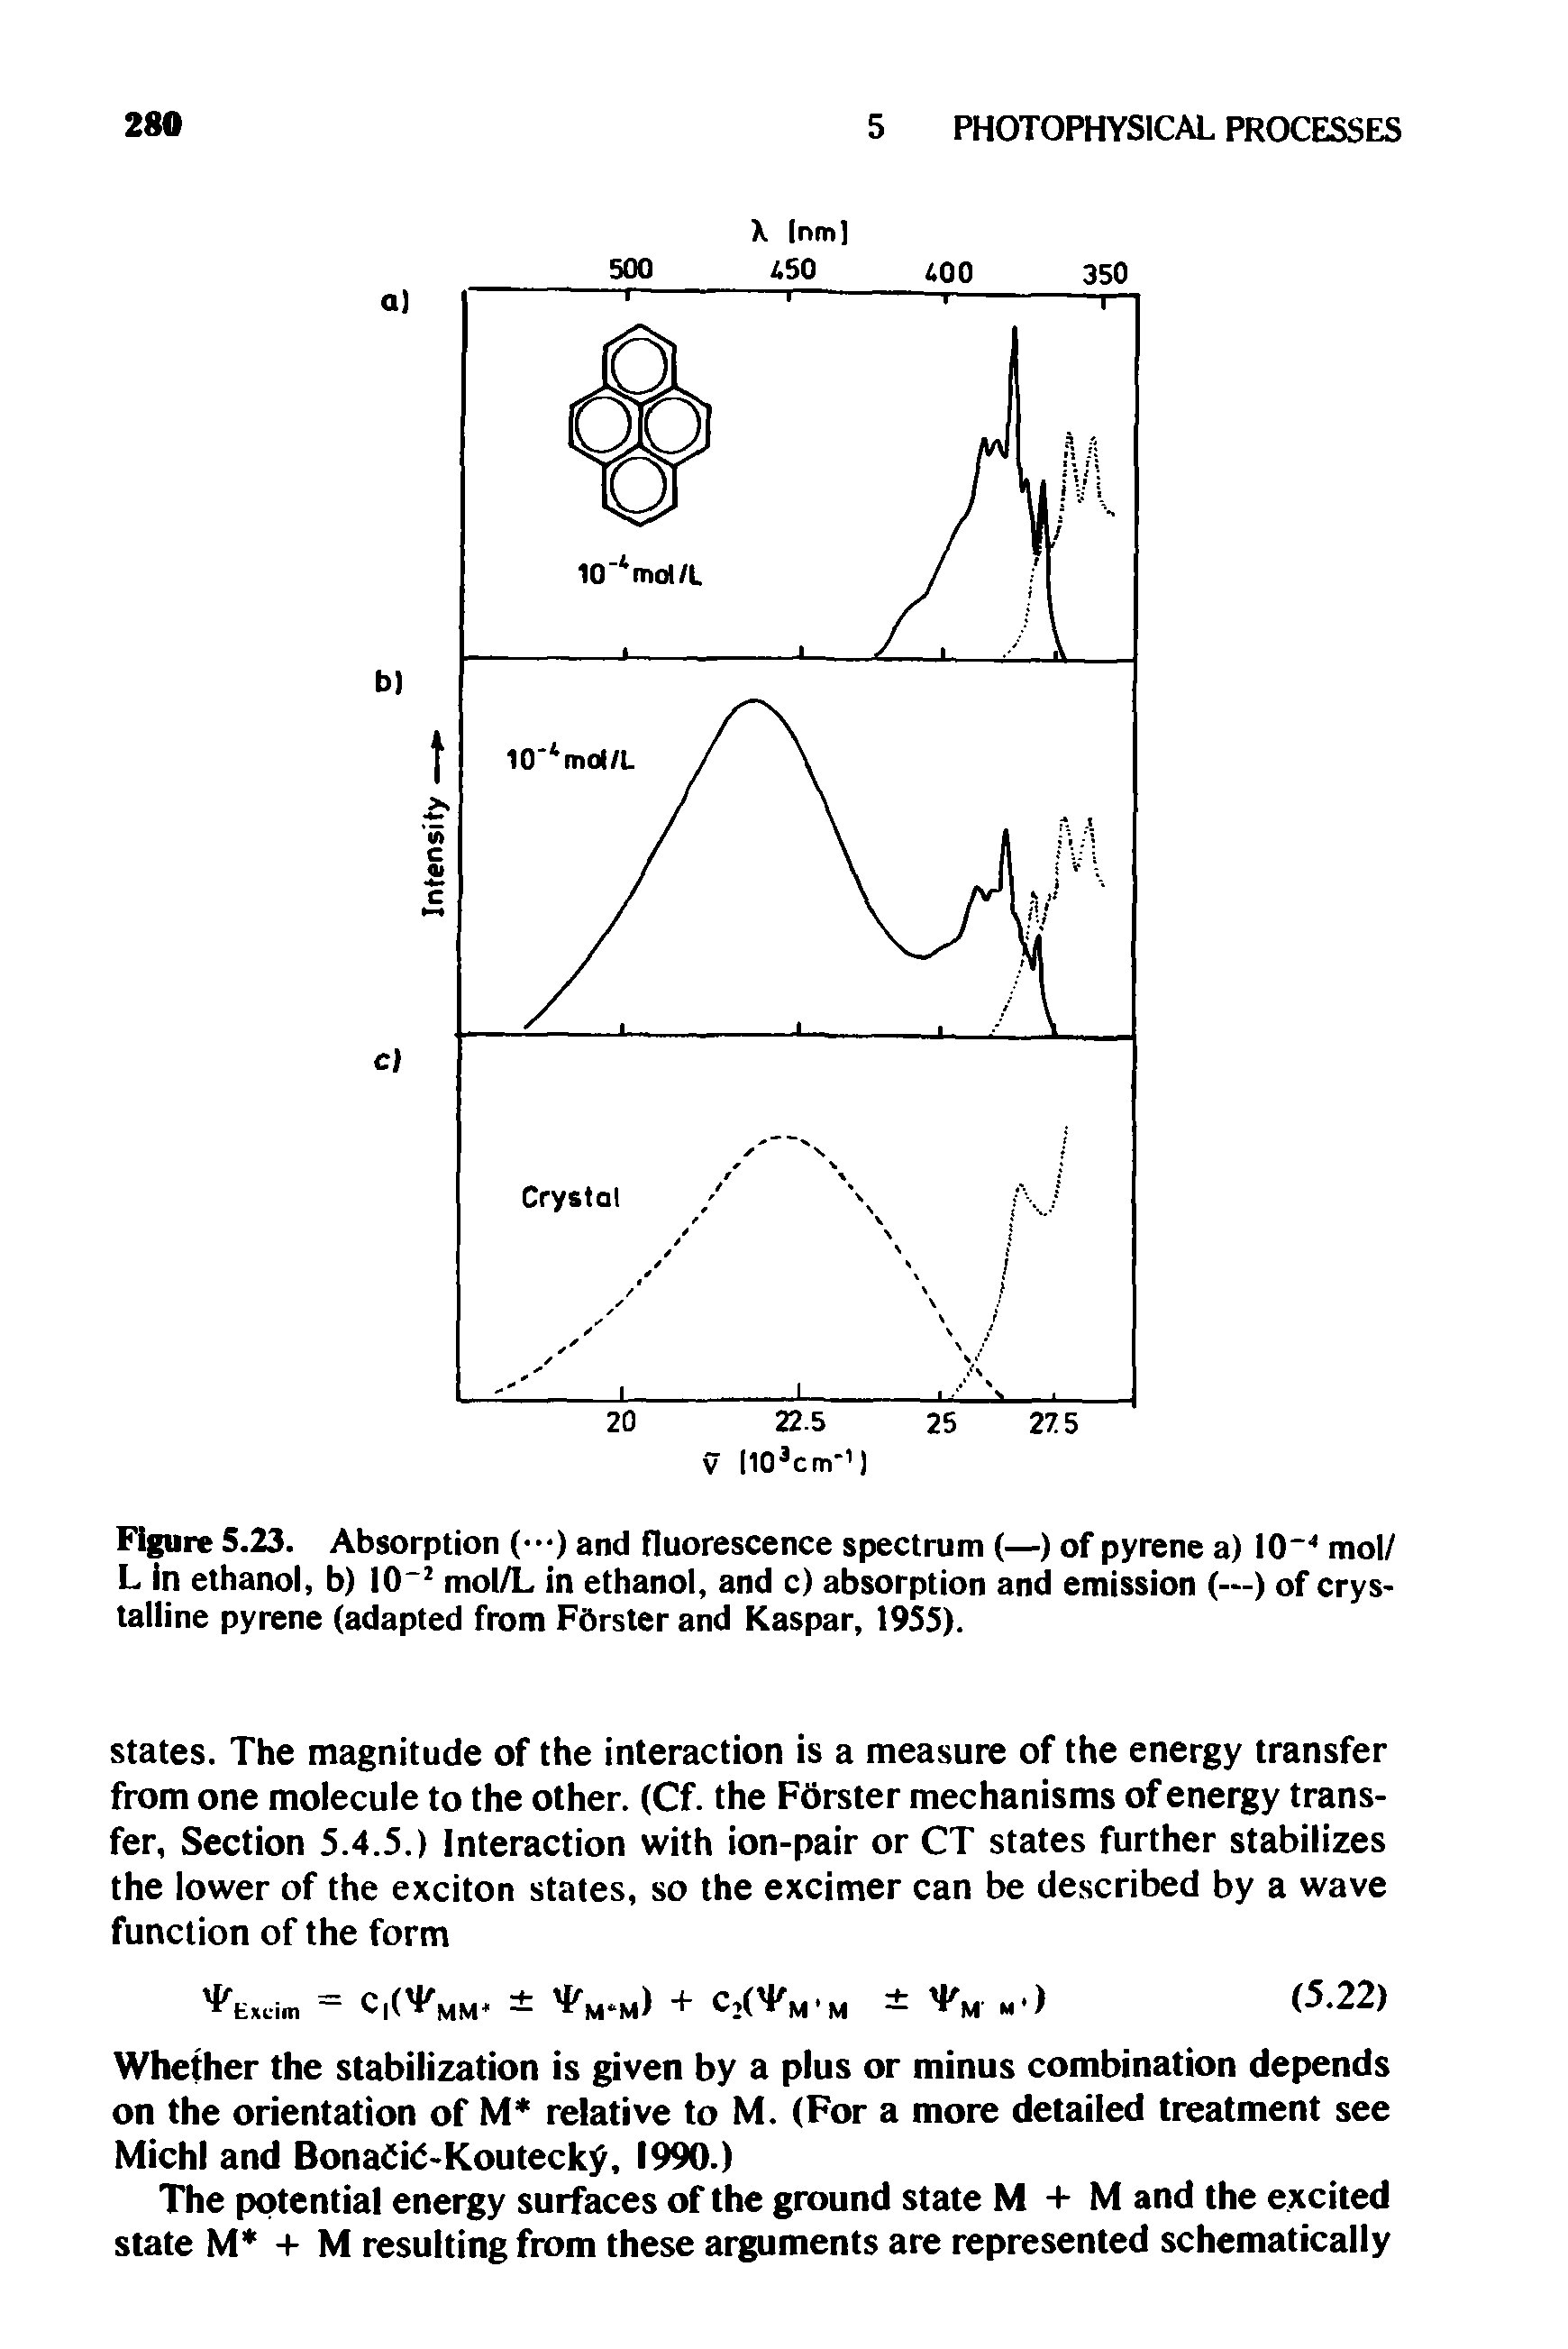 Figure 5.23. Absorption ( ) and fluorescence spectrum (—) of pyrene a) 10 mol/ L in ethanol, b) 10" mol/L in ethanol, and c) absorption and emission (—) of crystalline pyrene (adapted from FOrster and Kaspar, 1955).